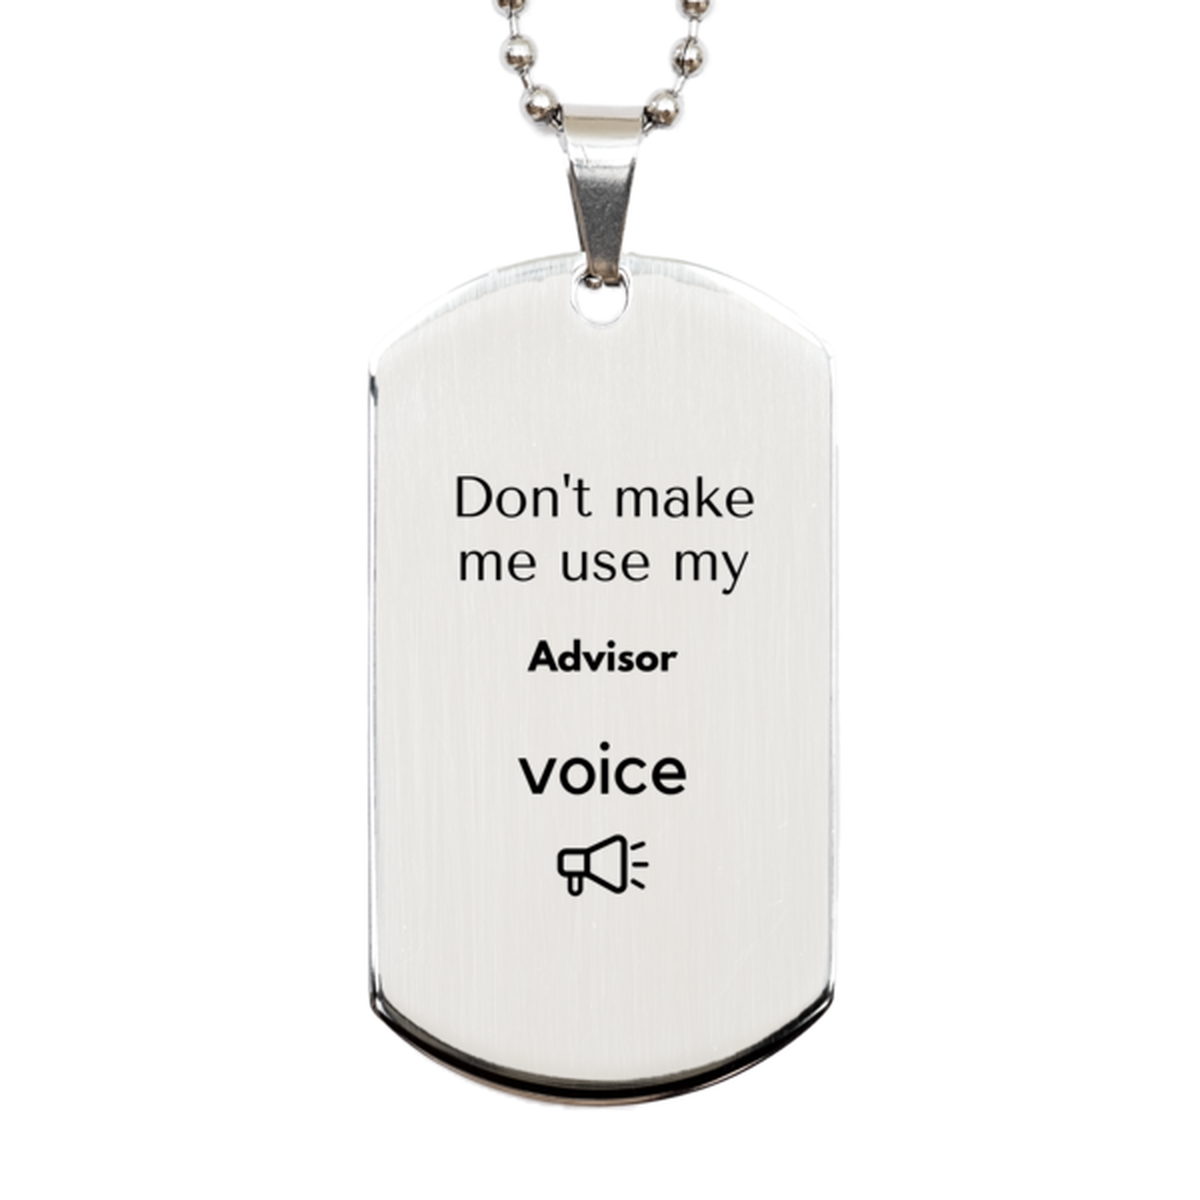 Don't make me use my Advisor voice, Sarcasm Advisor Gifts, Christmas Advisor Silver Dog Tag Birthday Unique Gifts For Advisor Coworkers, Men, Women, Colleague, Friends